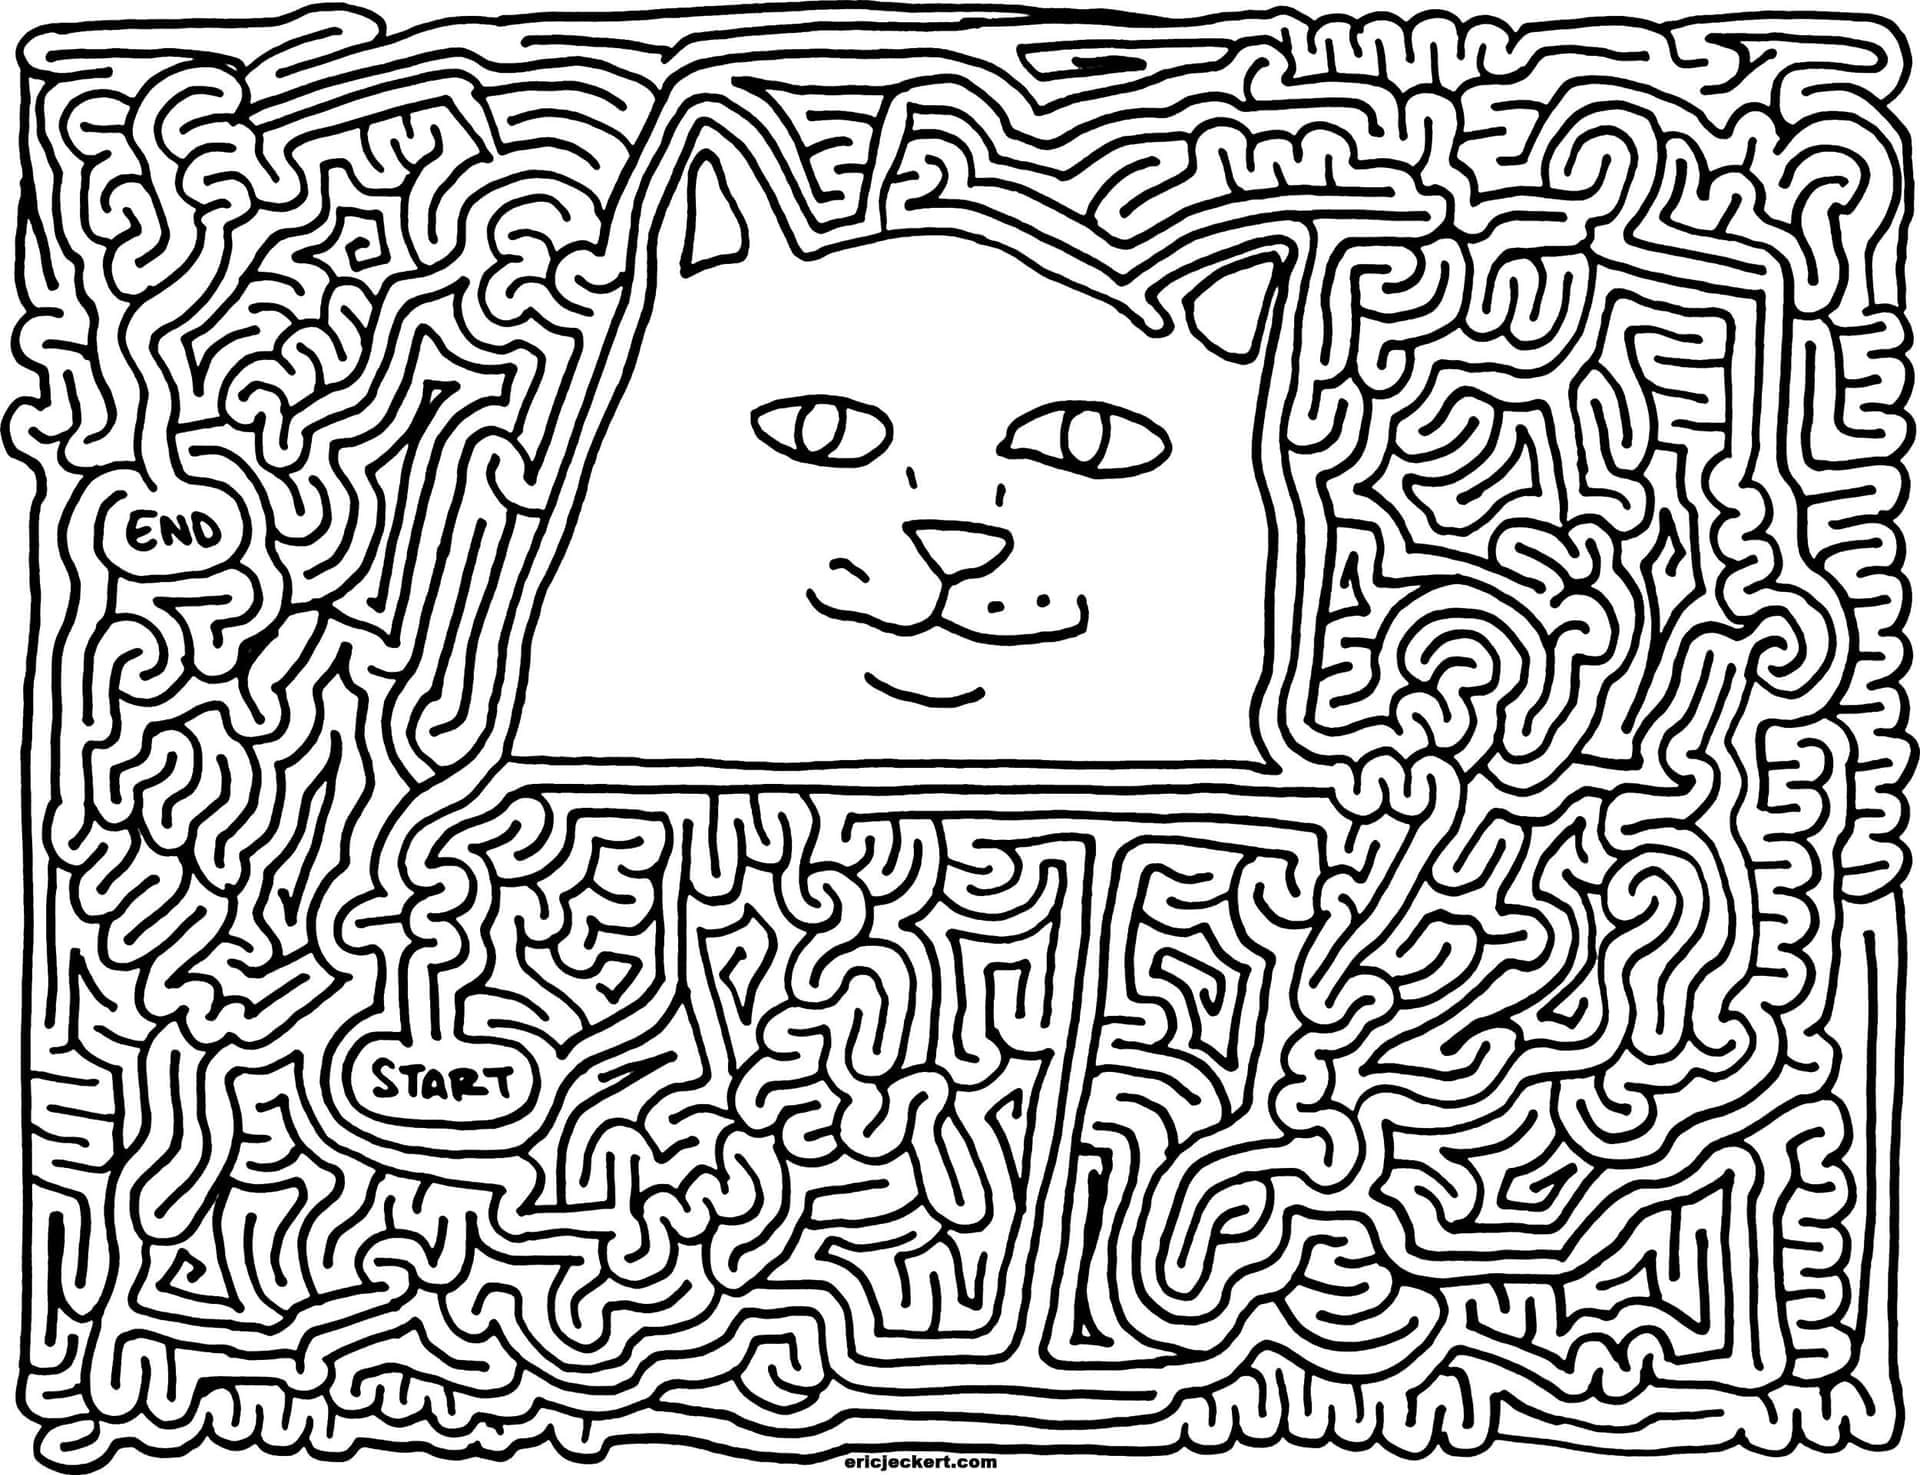 A Cat In A Maze With A Maze Background